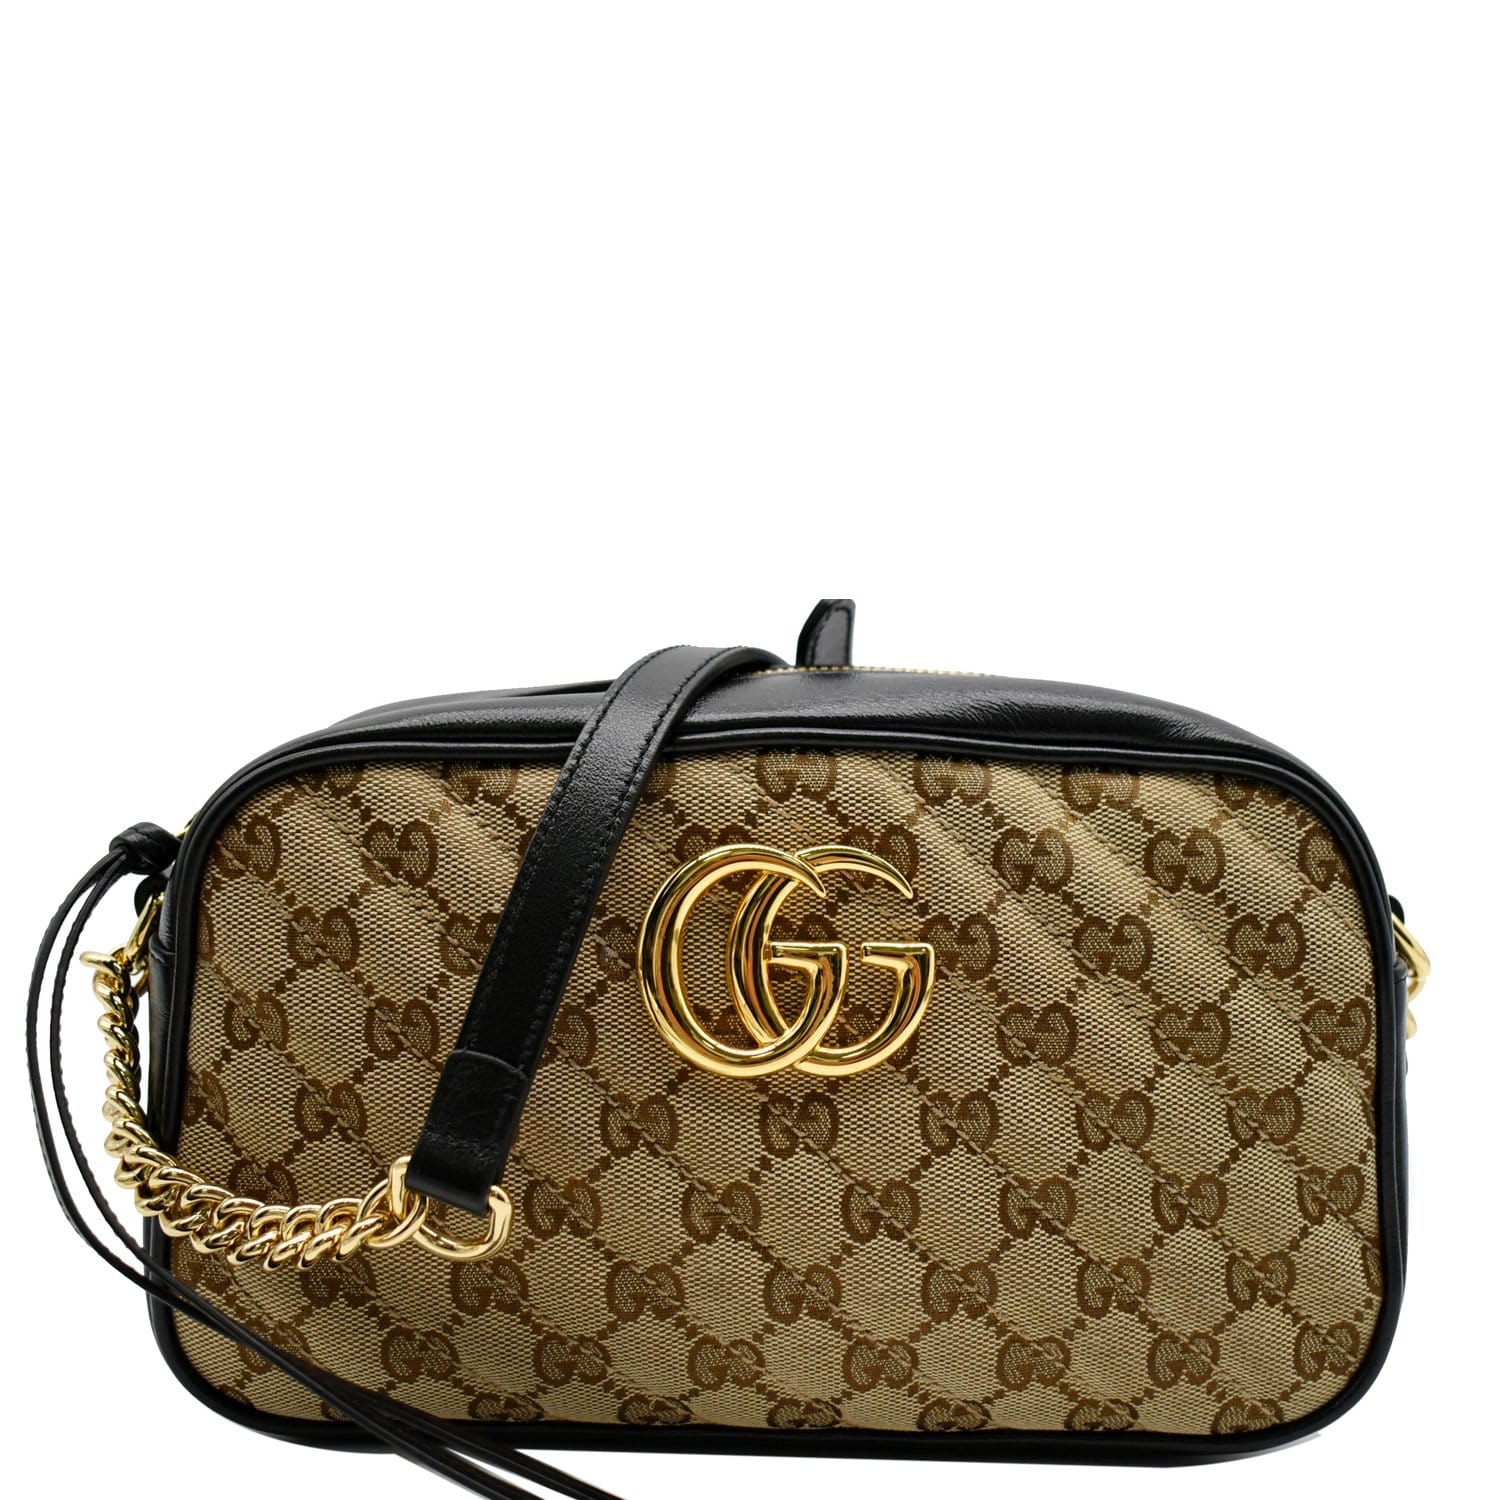 Gucci GG Marmont Small Shoulder Bag Review  Gucci small bag, Gg marmont  small shoulder bag, Gucci handbags crossbody